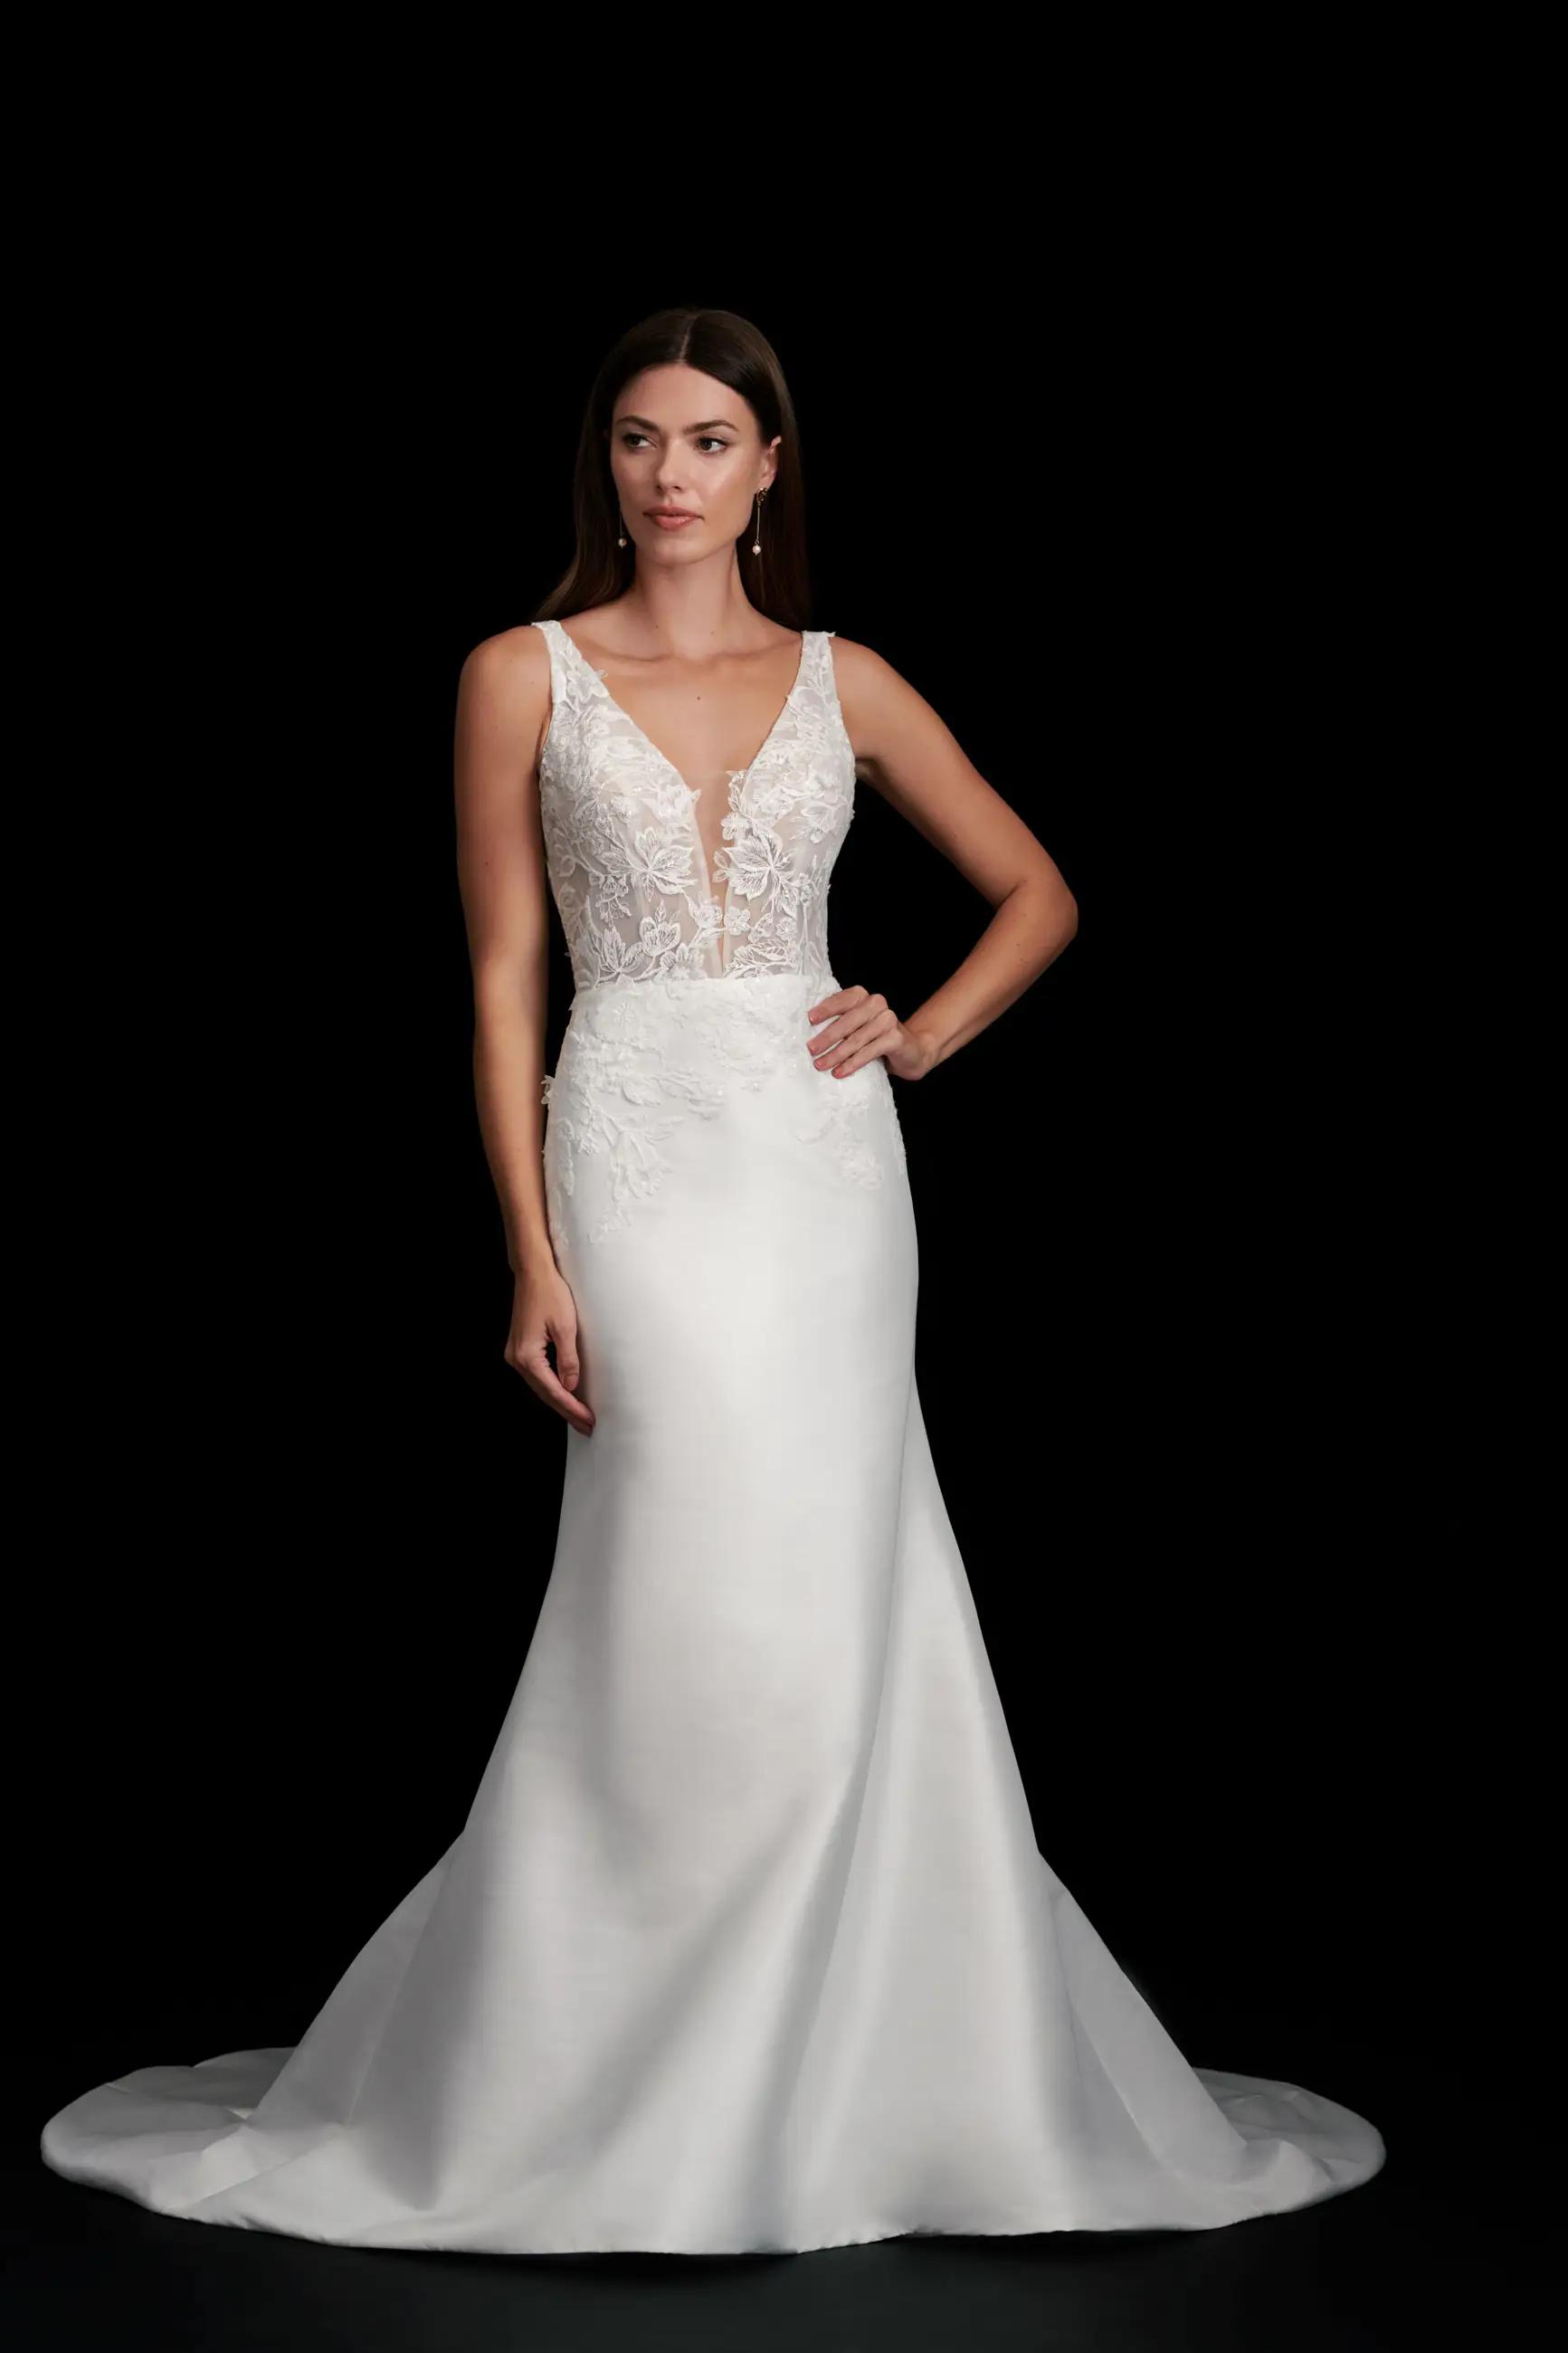 Francine wedding dress by Kelly Faetanini with V neckline and lace bodice with corset detail and mikado bow